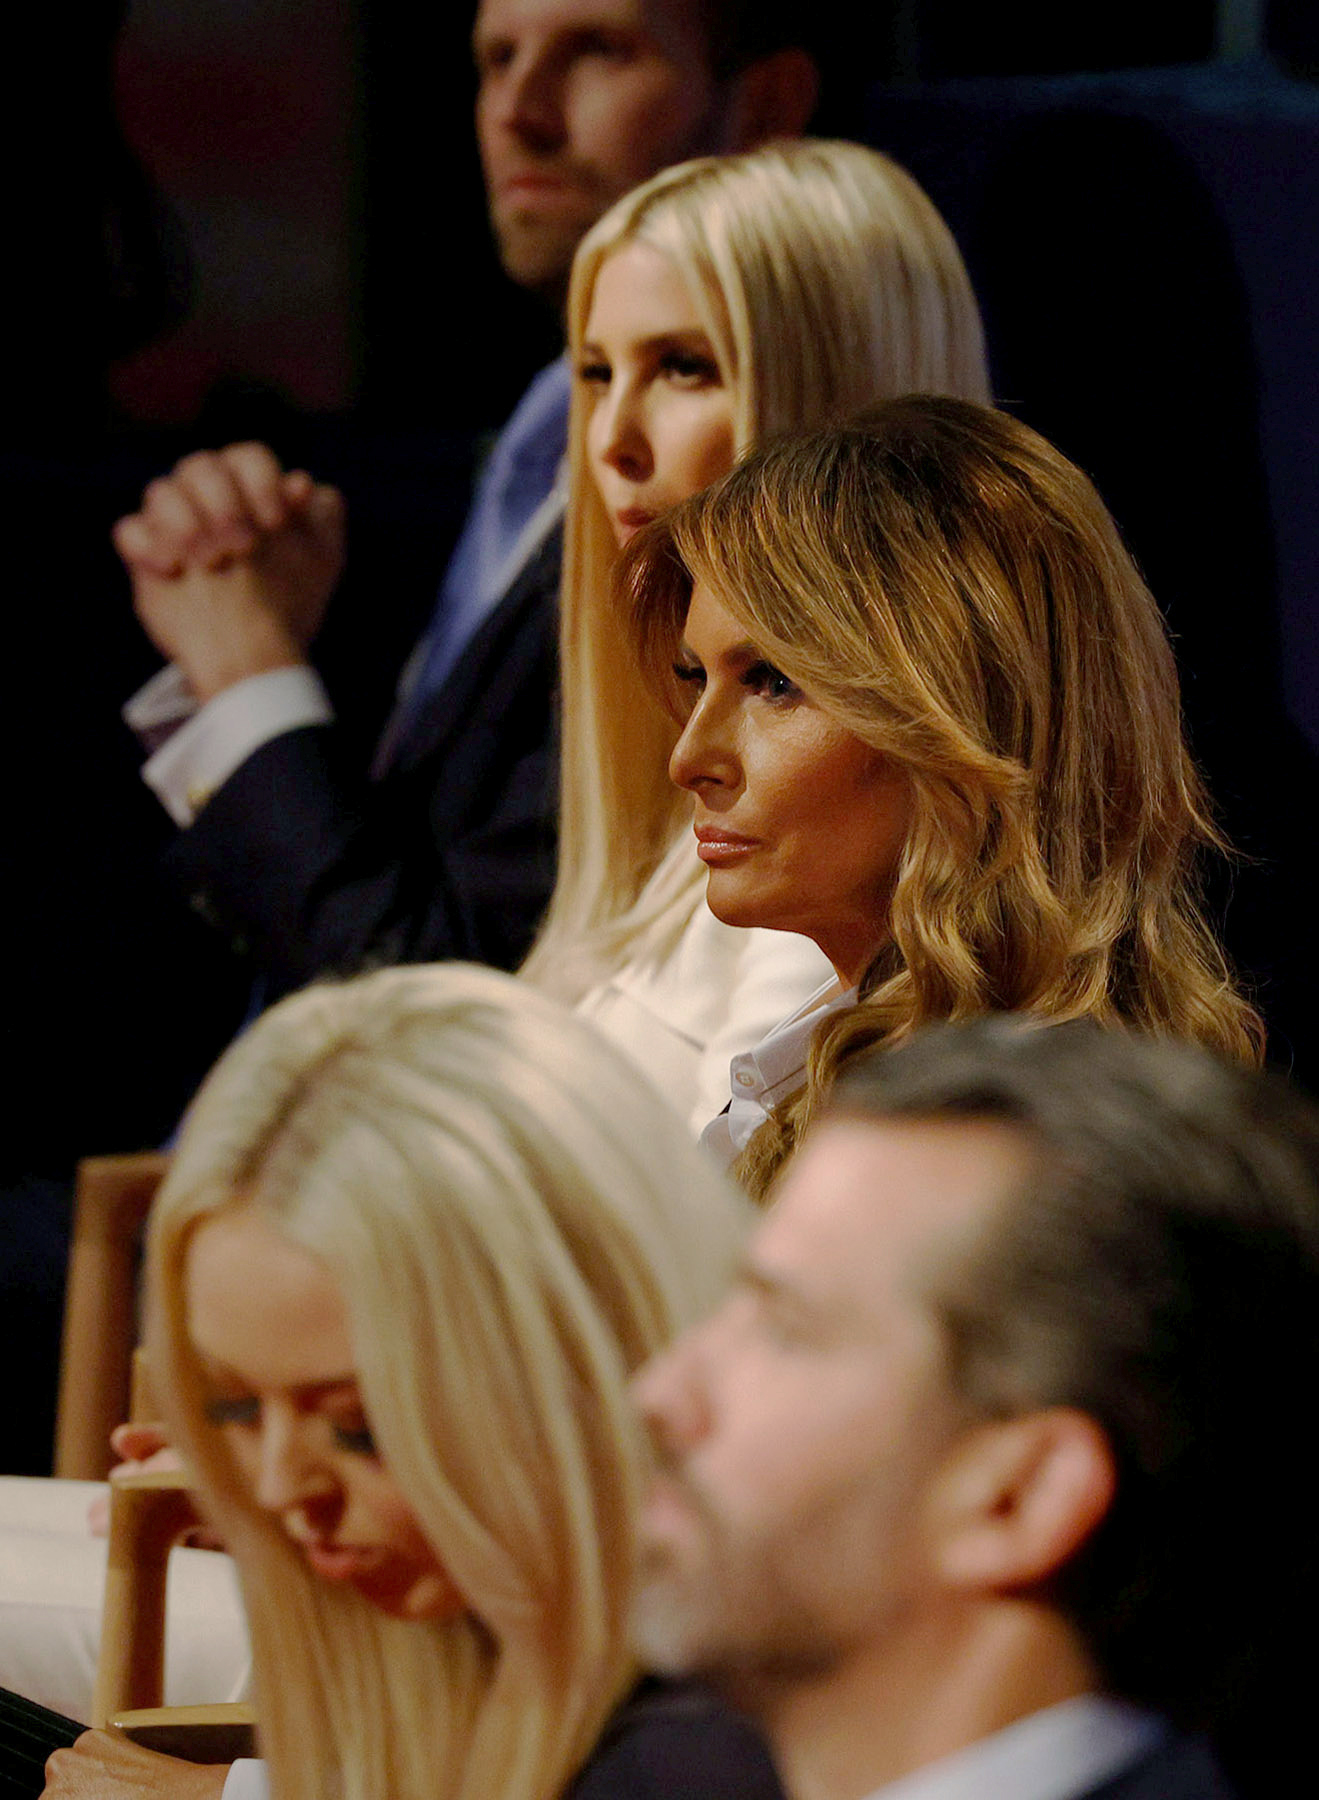 PHOTO: First lady Melania Trump watches after taking off her face mask while sitting with the rest of the Trump family, including Donald Trump Jr., Tiffany Trump, Ivanka Trump and Eric Trump, before the start of the presidential campaign debate.